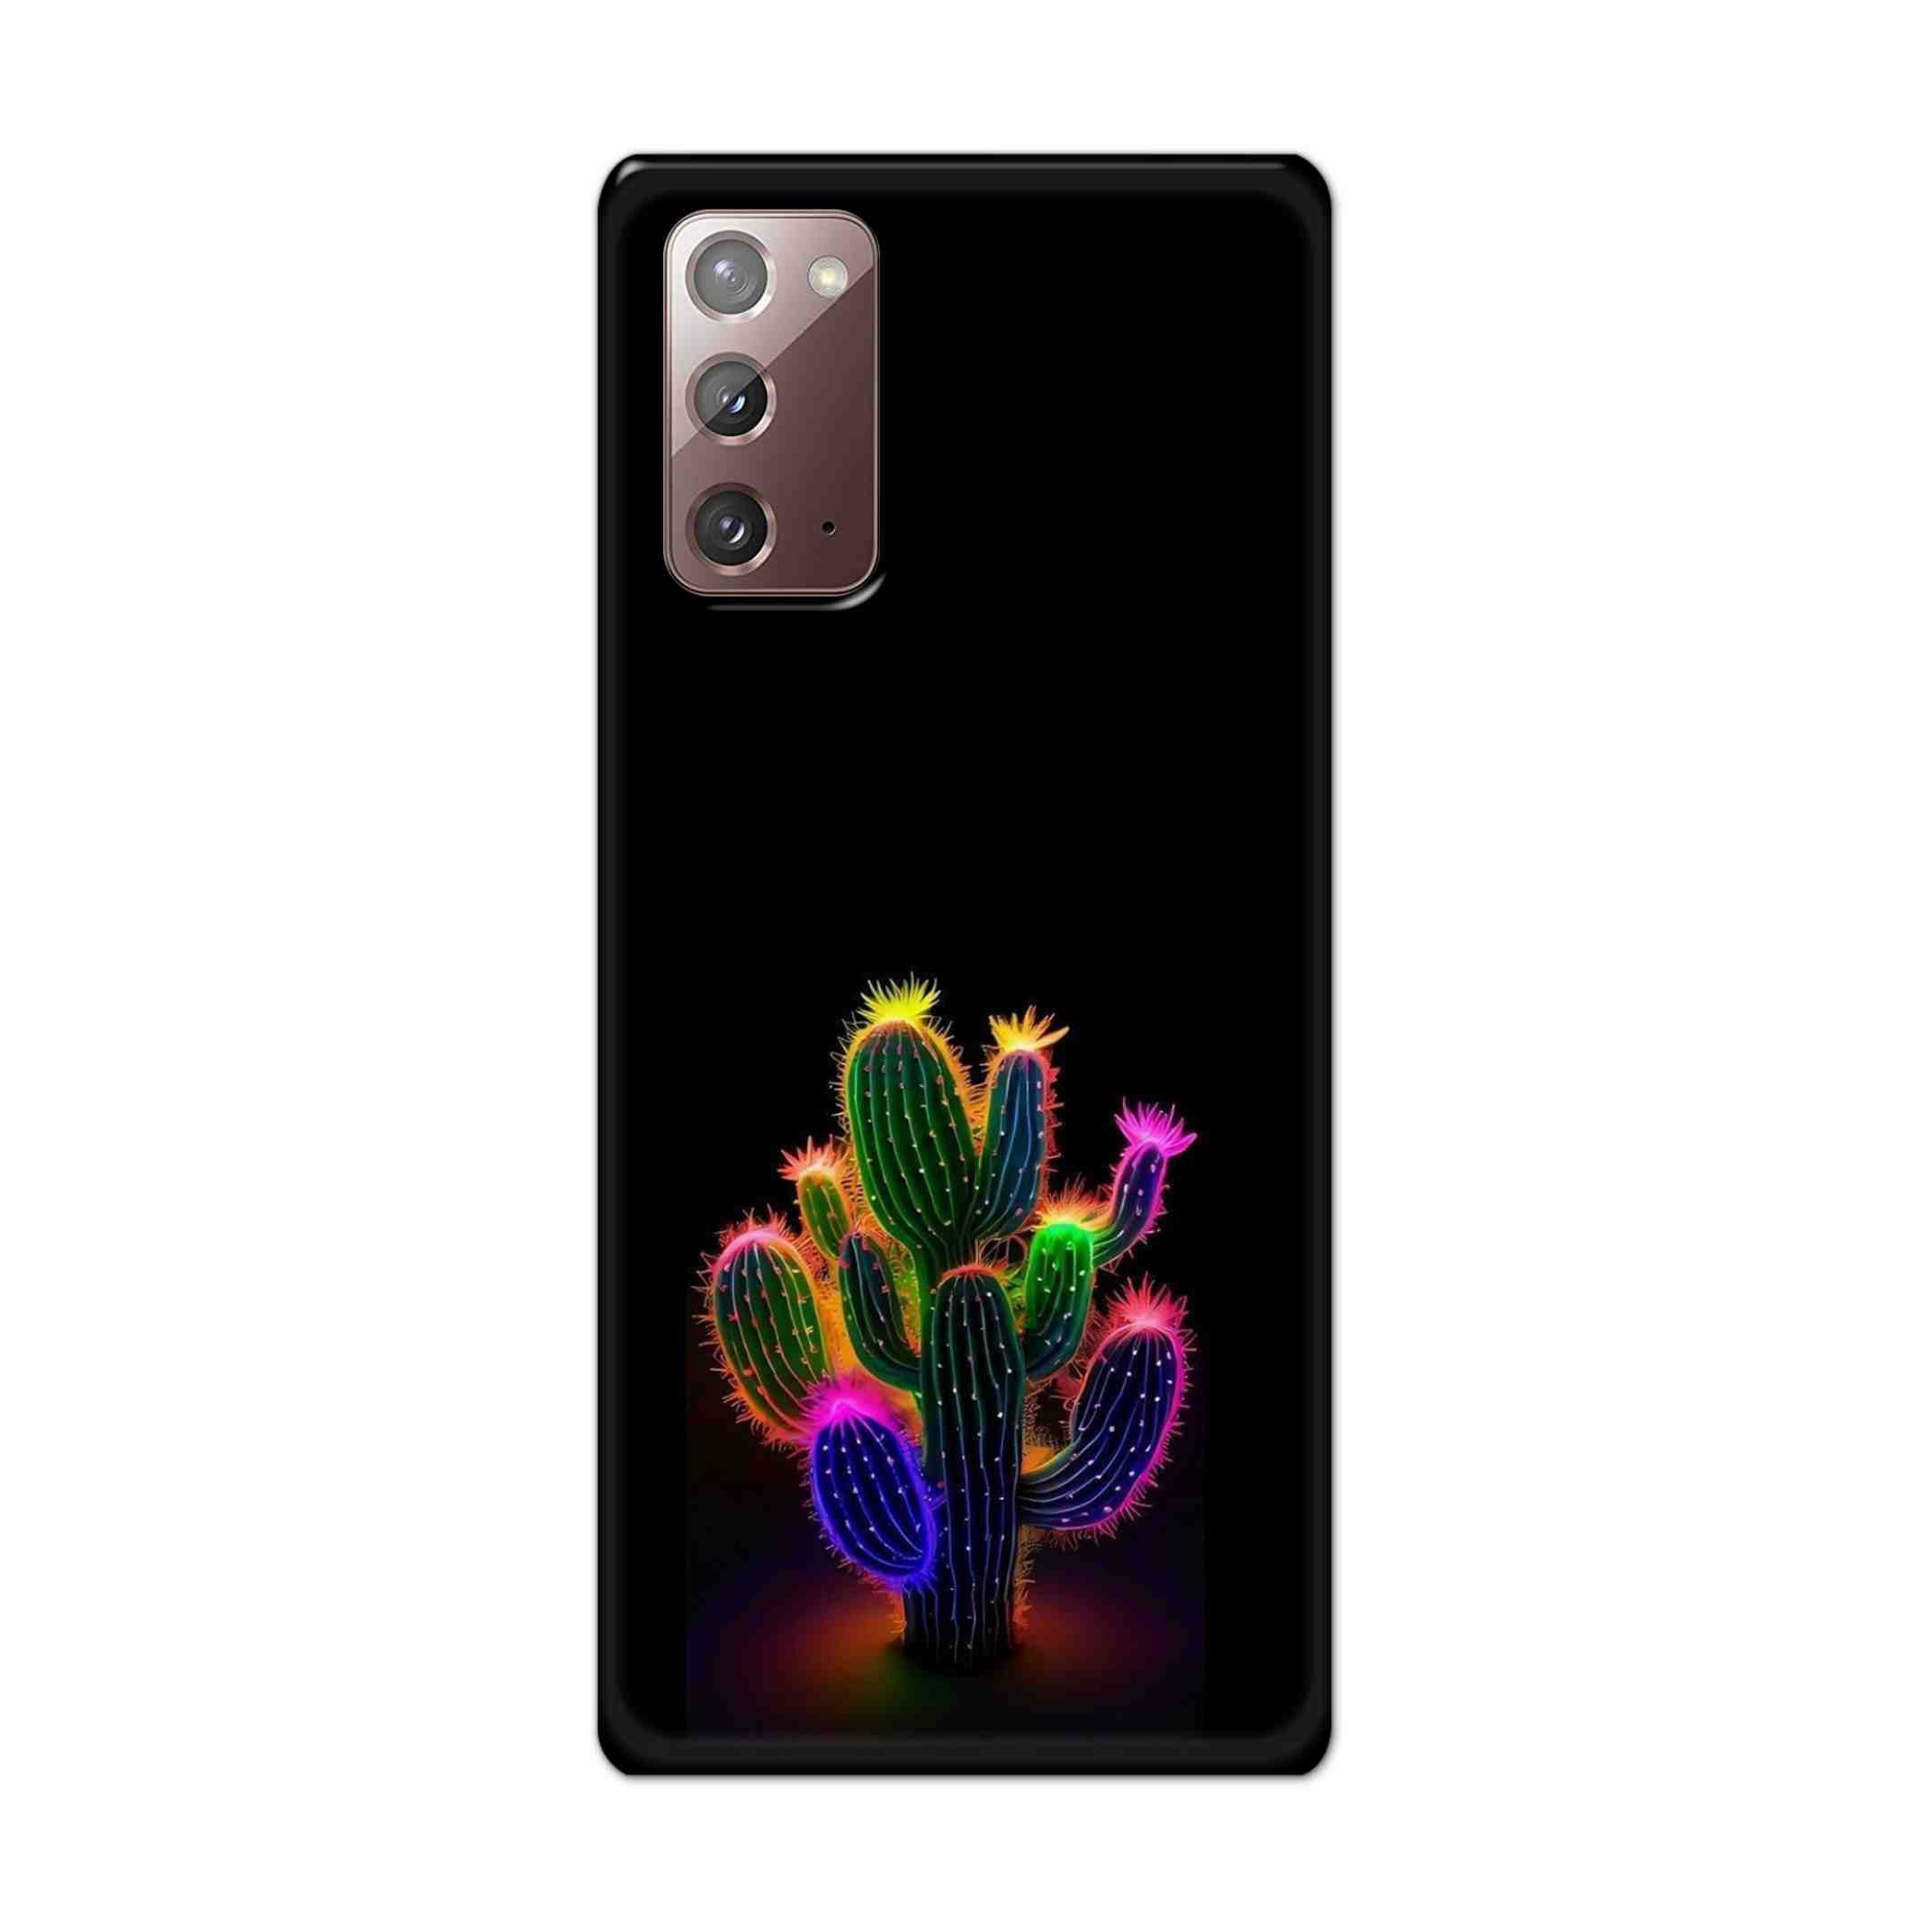 Buy Neon Flower Hard Back Mobile Phone Case Cover For Samsung Galaxy Note 20 Online